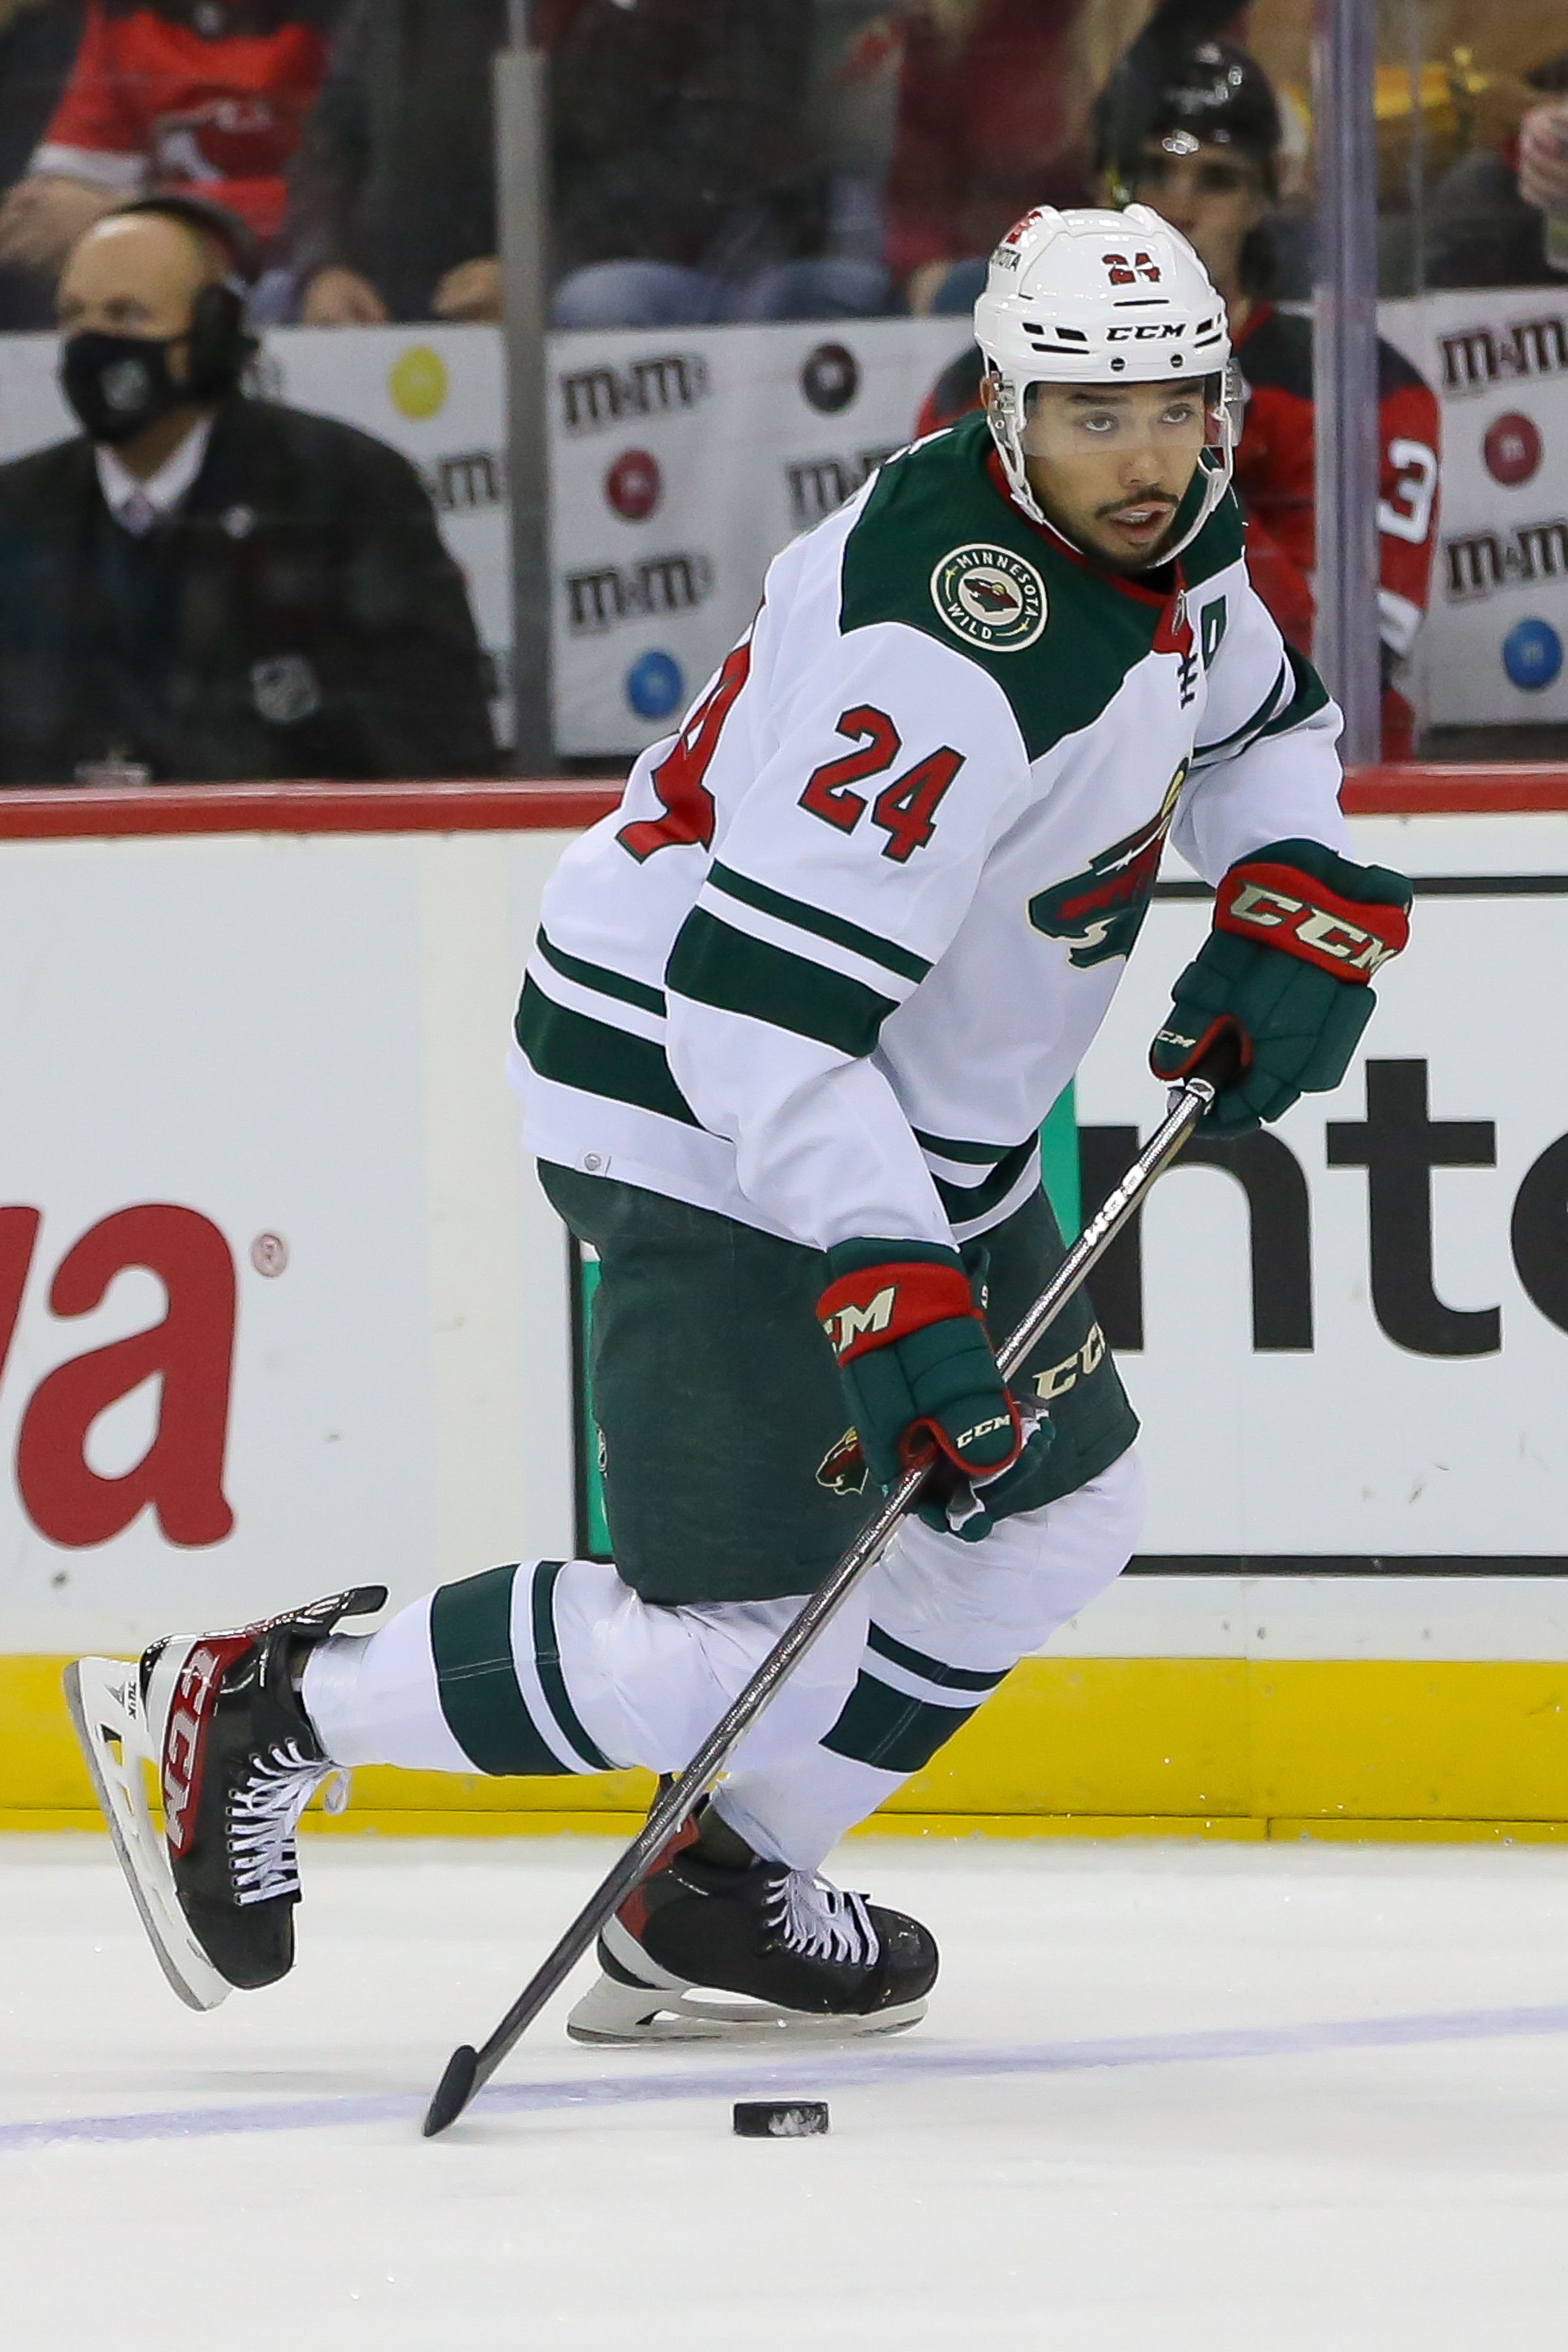 Minnesota Wild Place 2 Players on Waivers - NHL Trade Rumors 